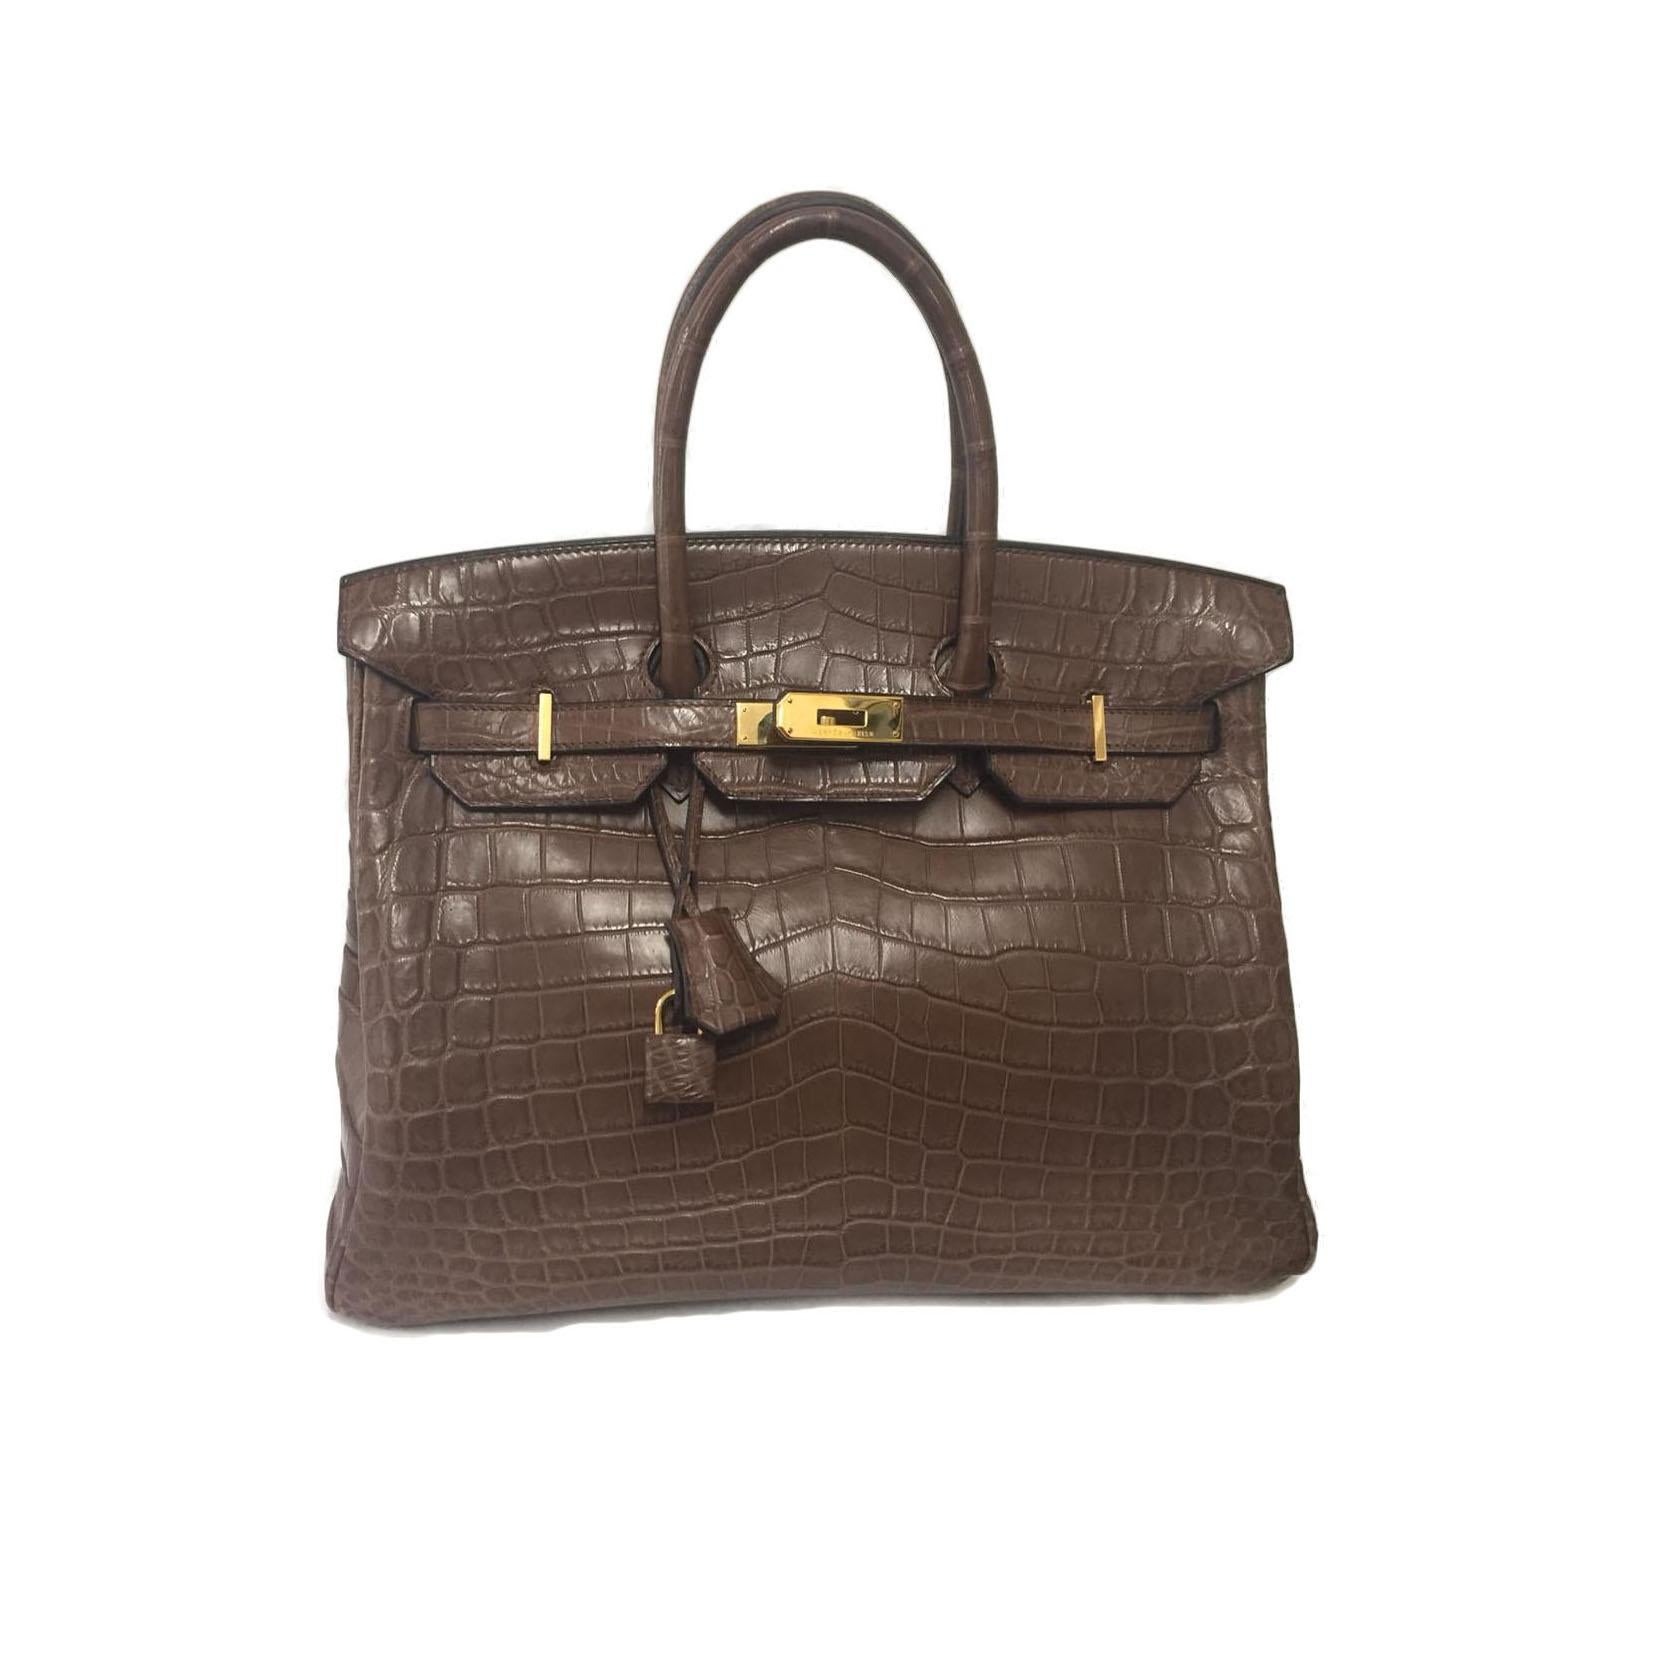 Hermes Paris Birkin 35 CM, exclusive Hermes Bag, made of alligator leather in luxurious design, in one of the most amazing colors.
The Hermes Paris Birkin Bag has gold hardware and gold four feet are located at the bottom of the bag.
The conditions